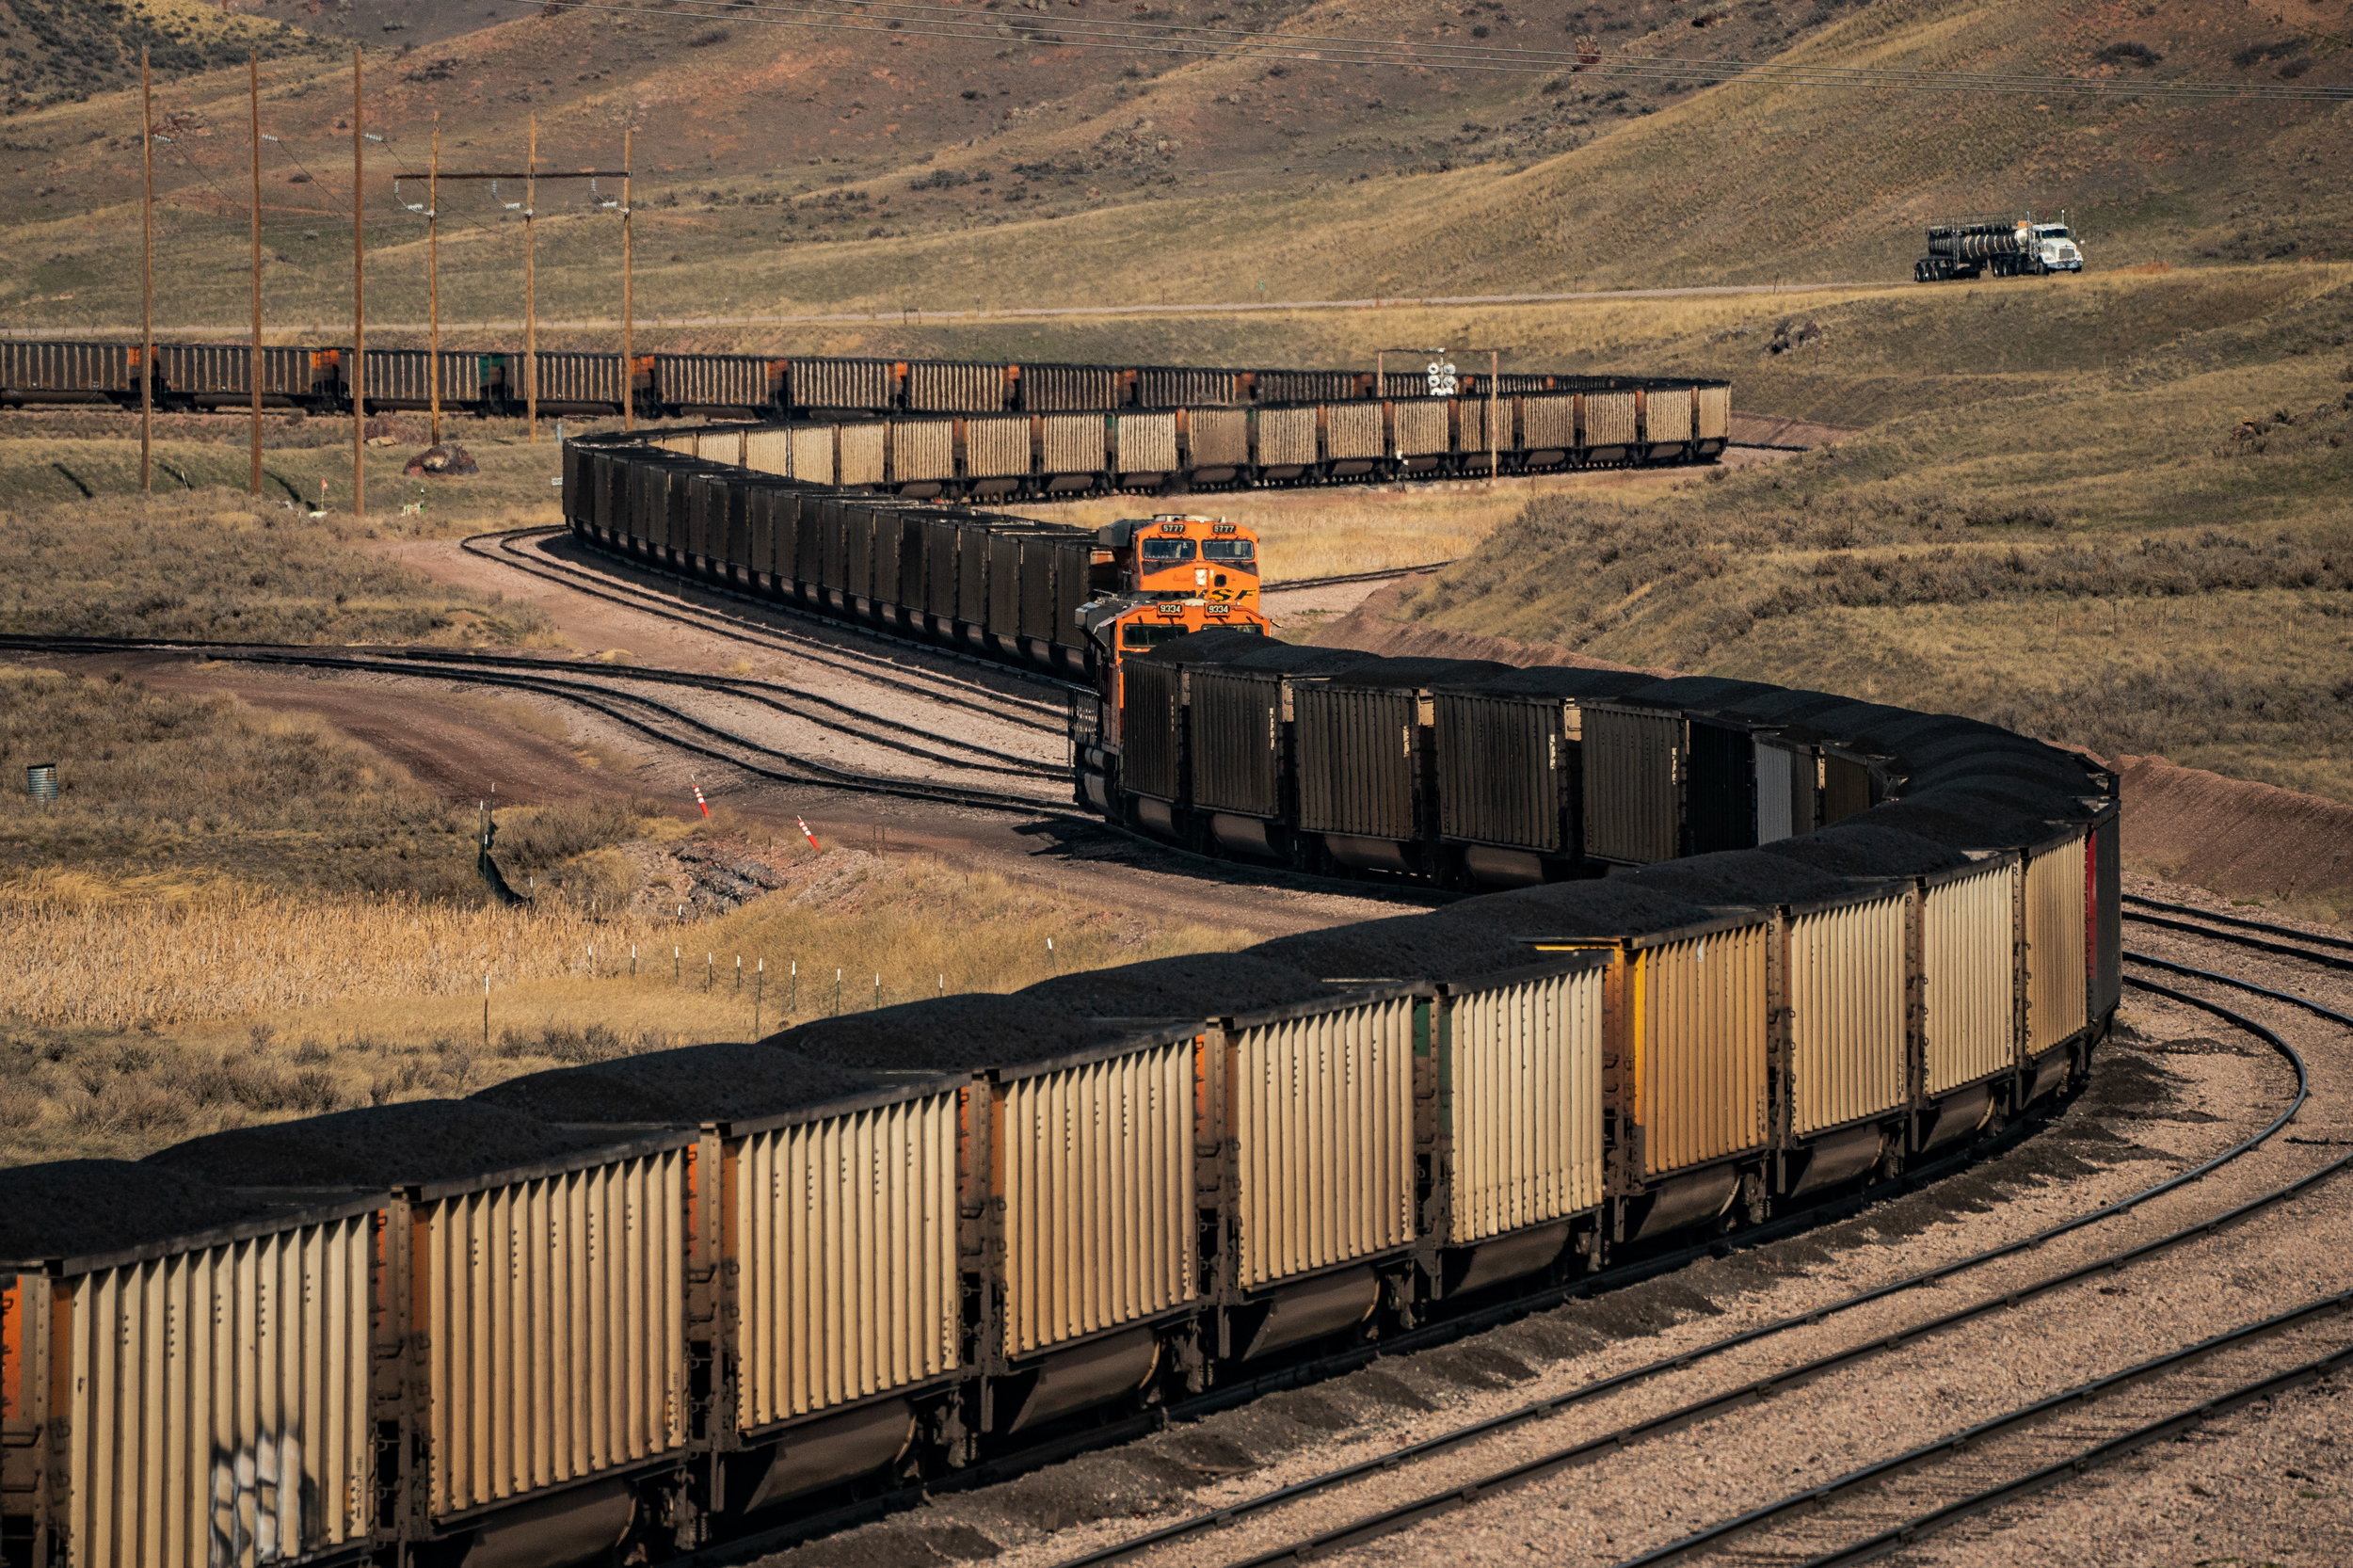 Trains filled with coal are seen near Gillette, Wyo. on Nov. 12, 2021. Credit: Salwan Georges/The Washington Post via Getty Images